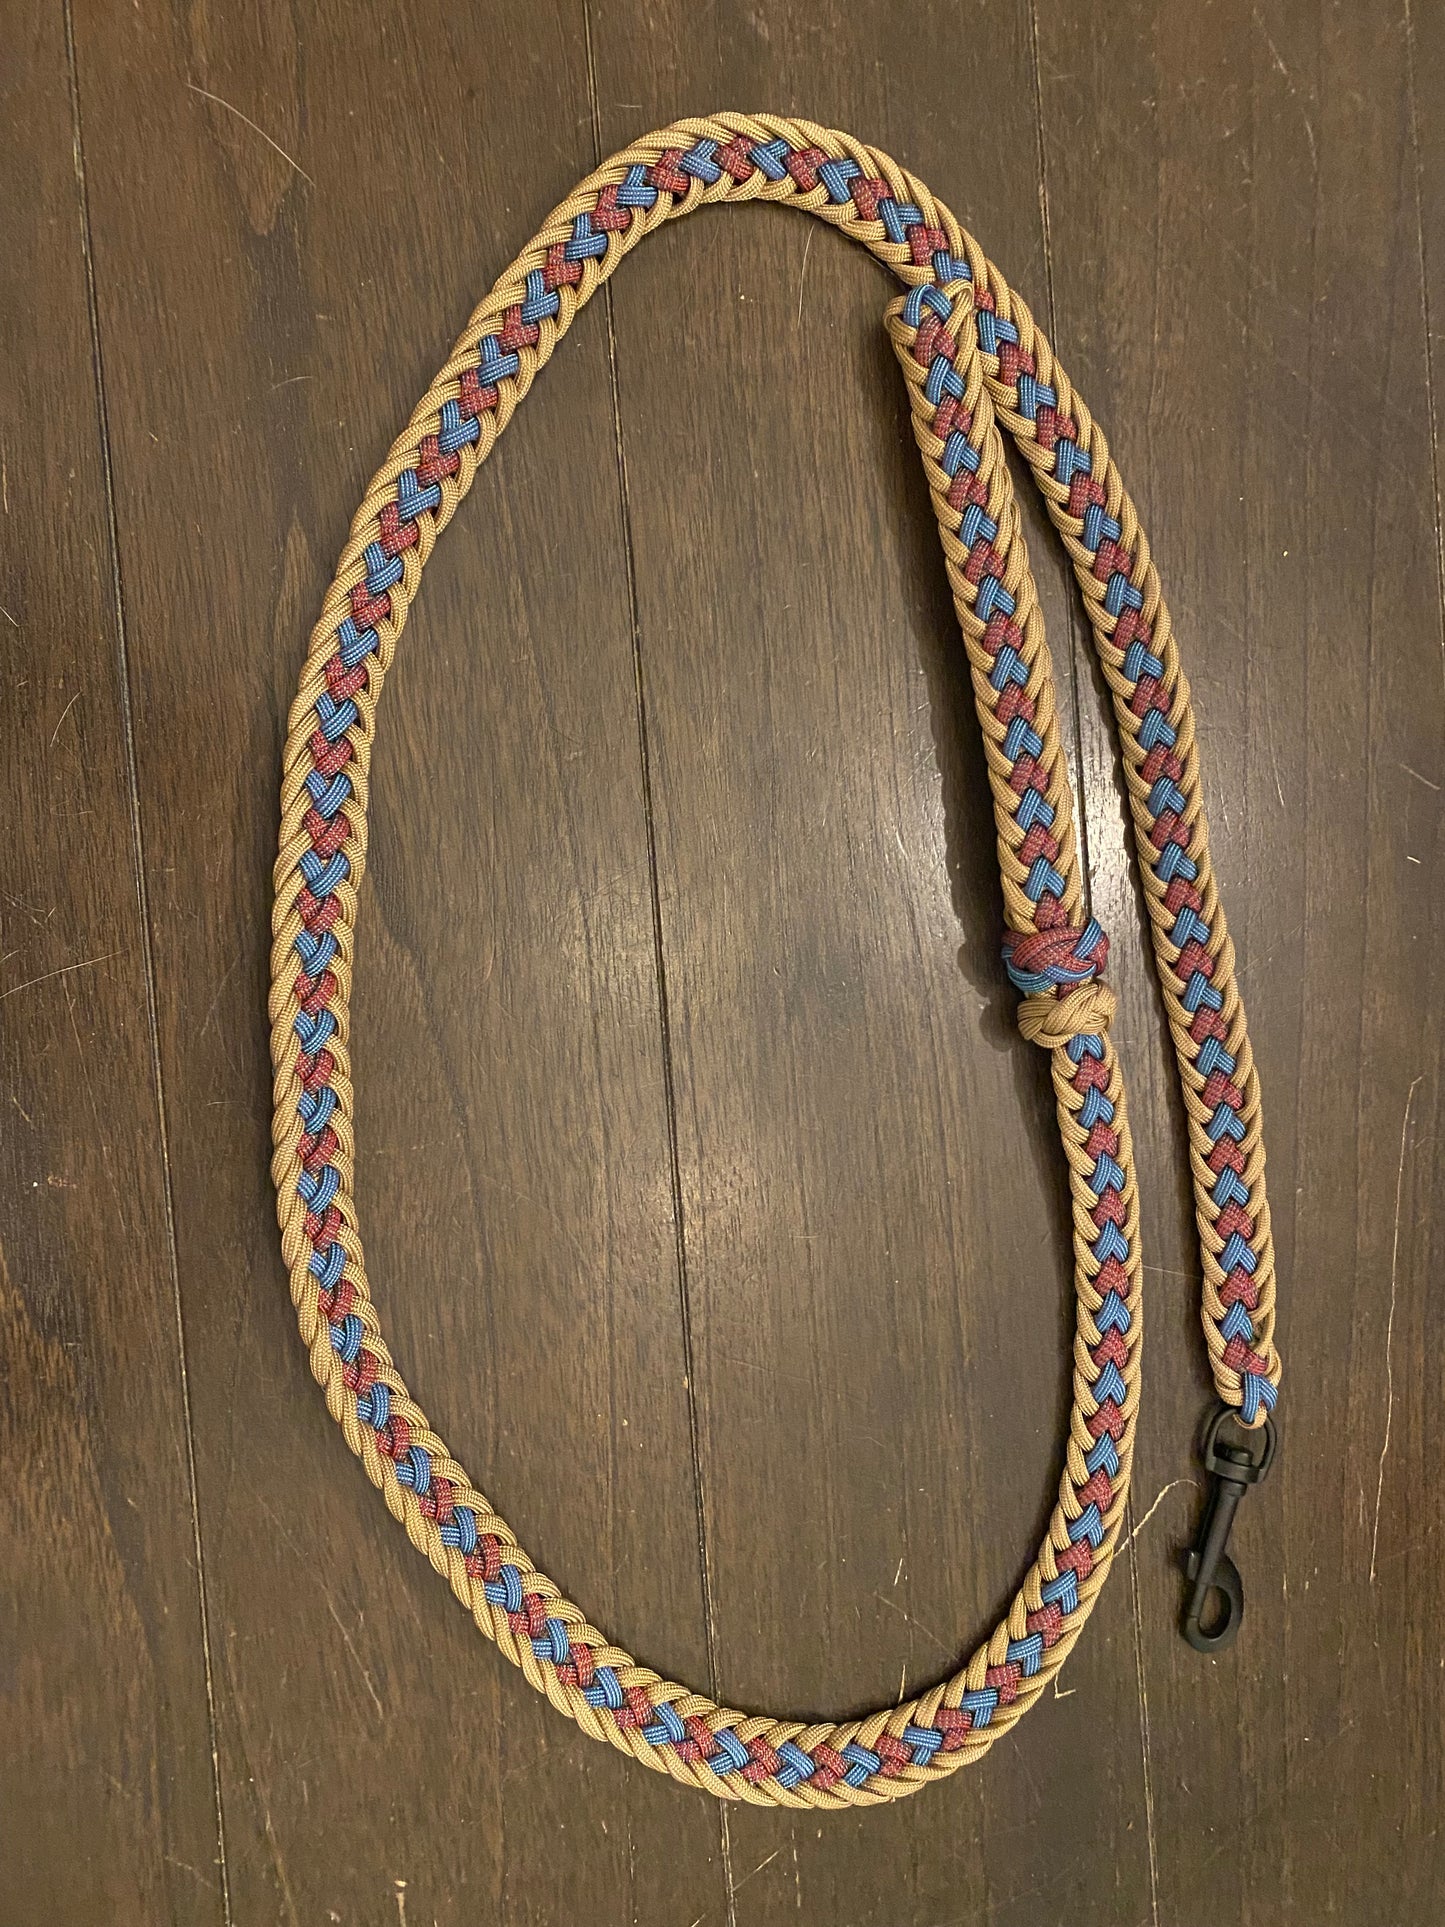 Premade Paracord Kara Yatsu Leash, Blue and Red Color Changing Paracord, Tan, 62 inches long